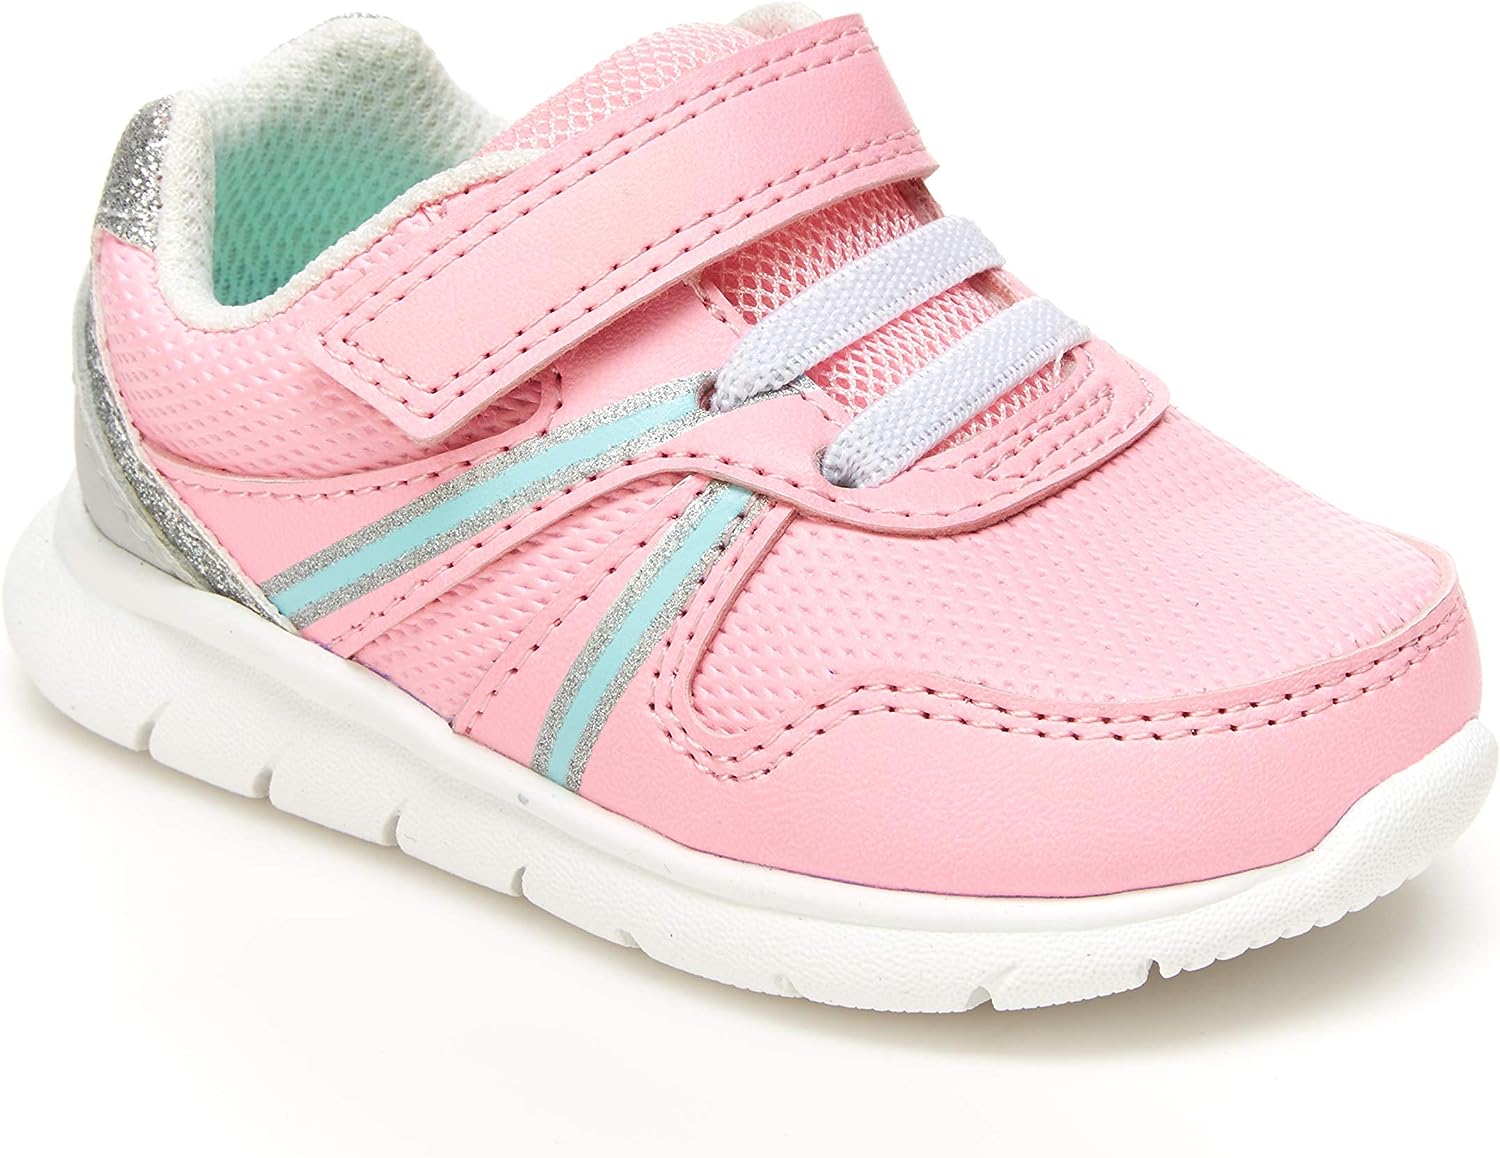 Simple Joys by Carter's Unisex-Child Nicky Athletic Sneaker